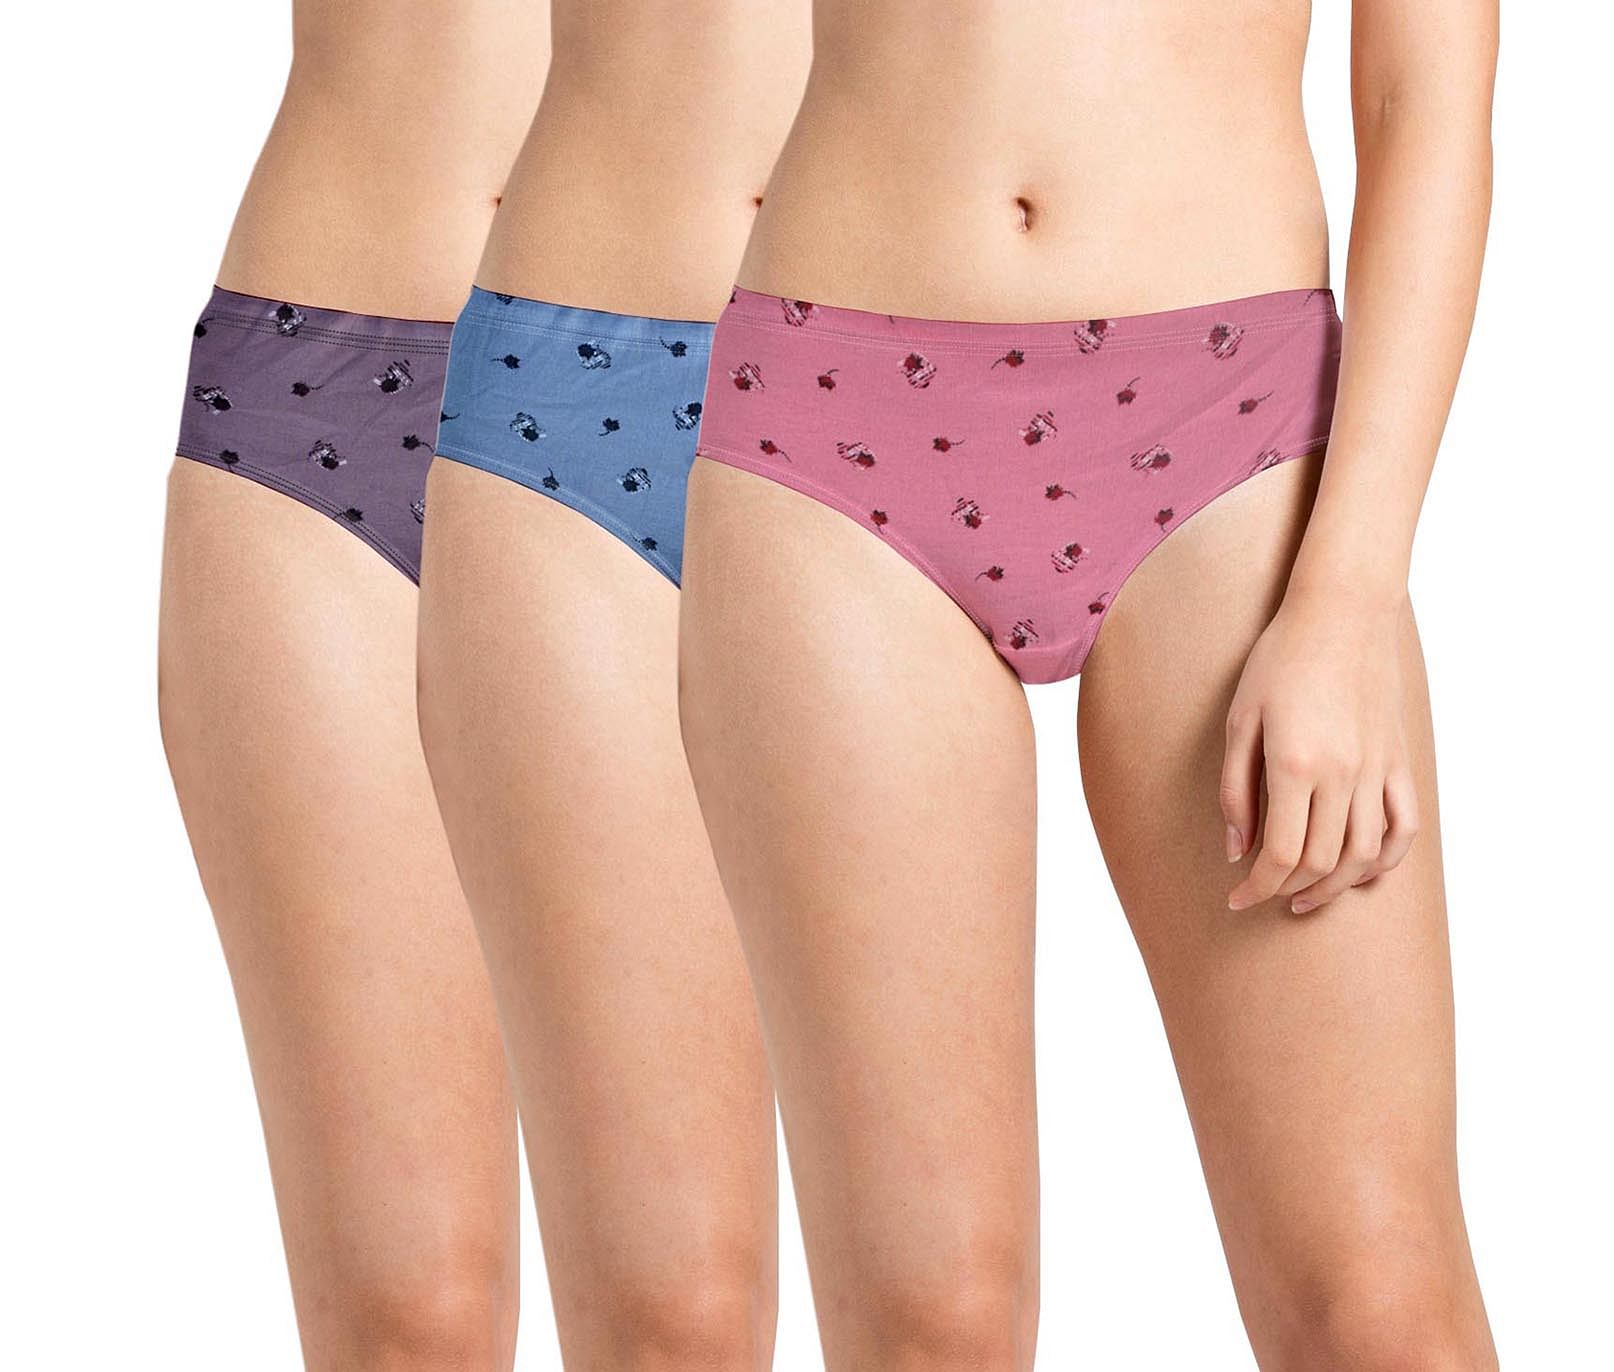 Wmn Panty KS033-P-IE-PRINT PACK 11 3XL SIZE ONLY